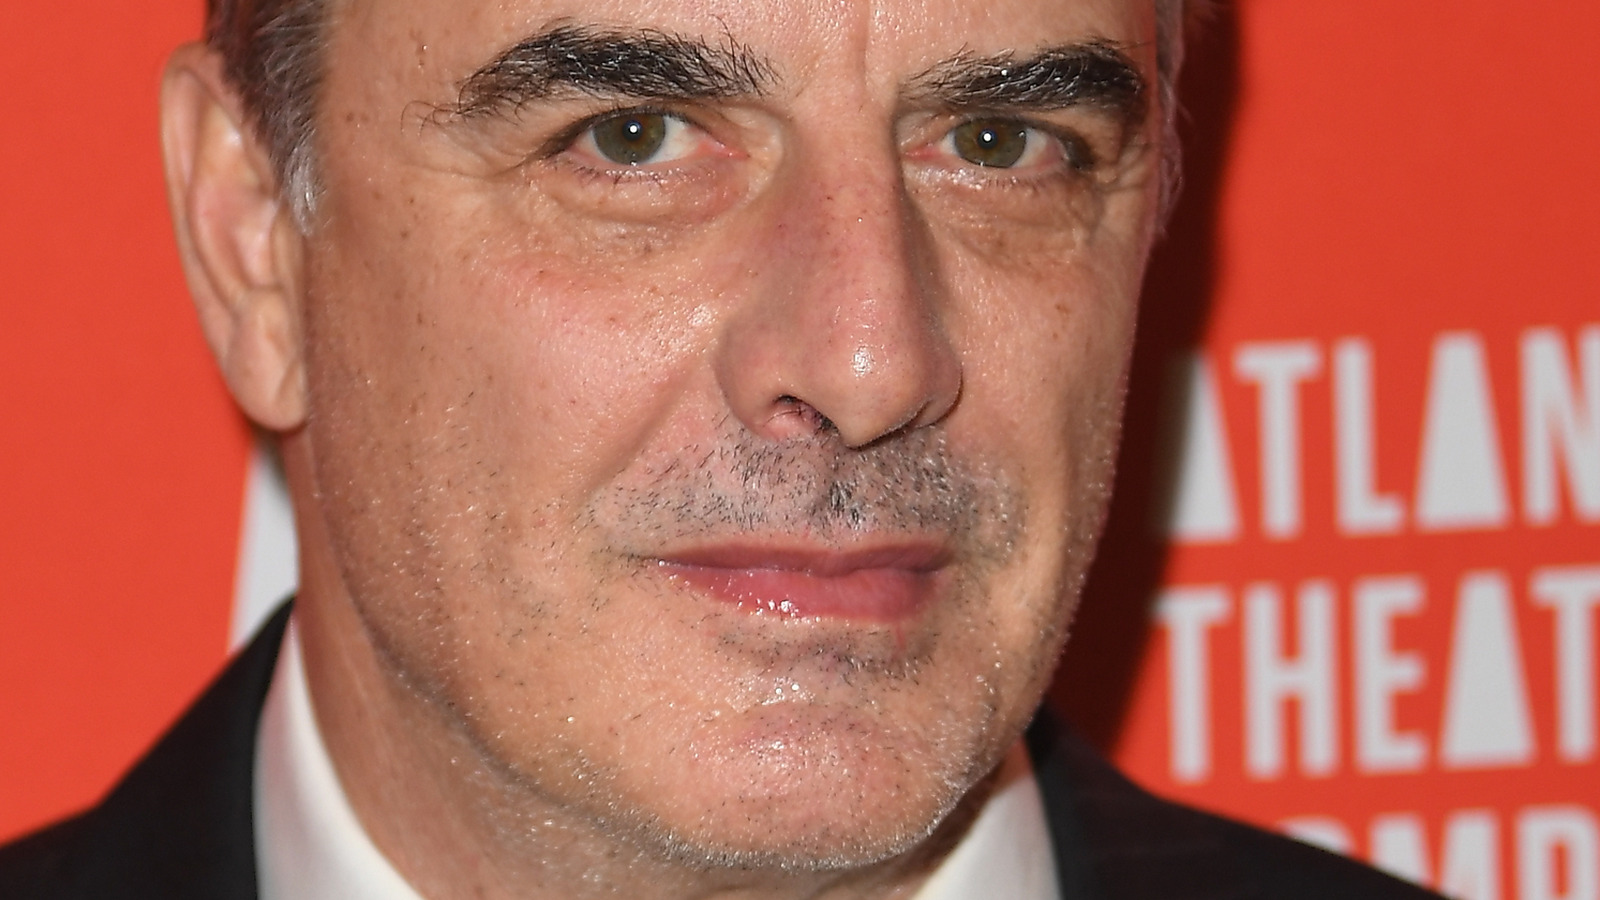 Chris Noth Reacts To The Sexual Assault Allegations Against Him